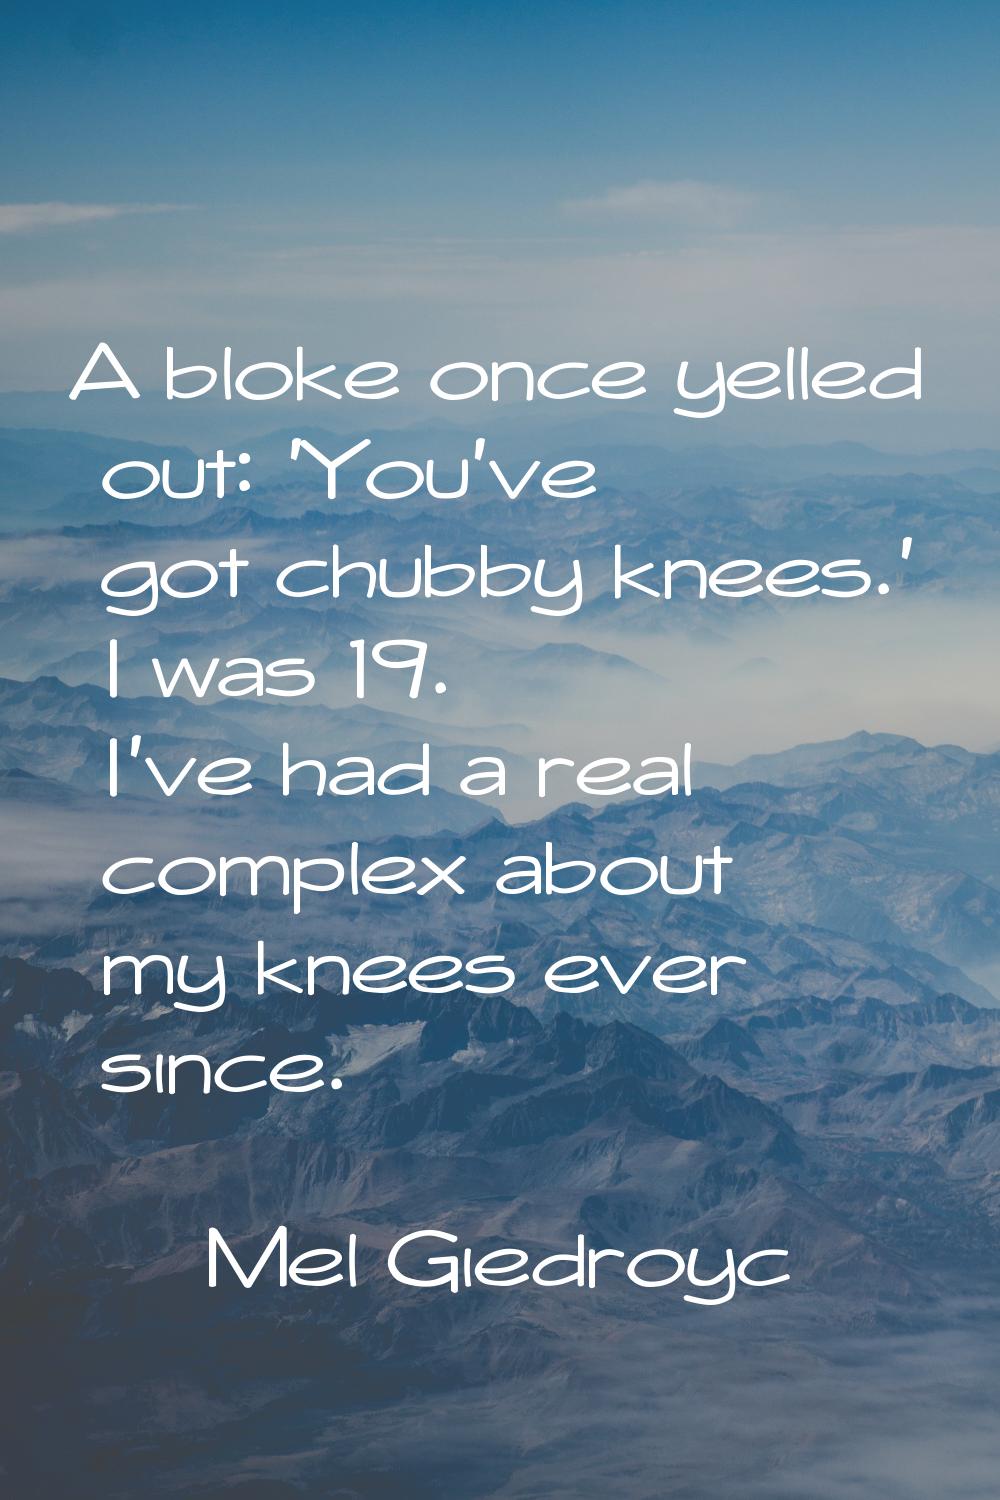 A bloke once yelled out: 'You've got chubby knees.' I was 19. I've had a real complex about my knee